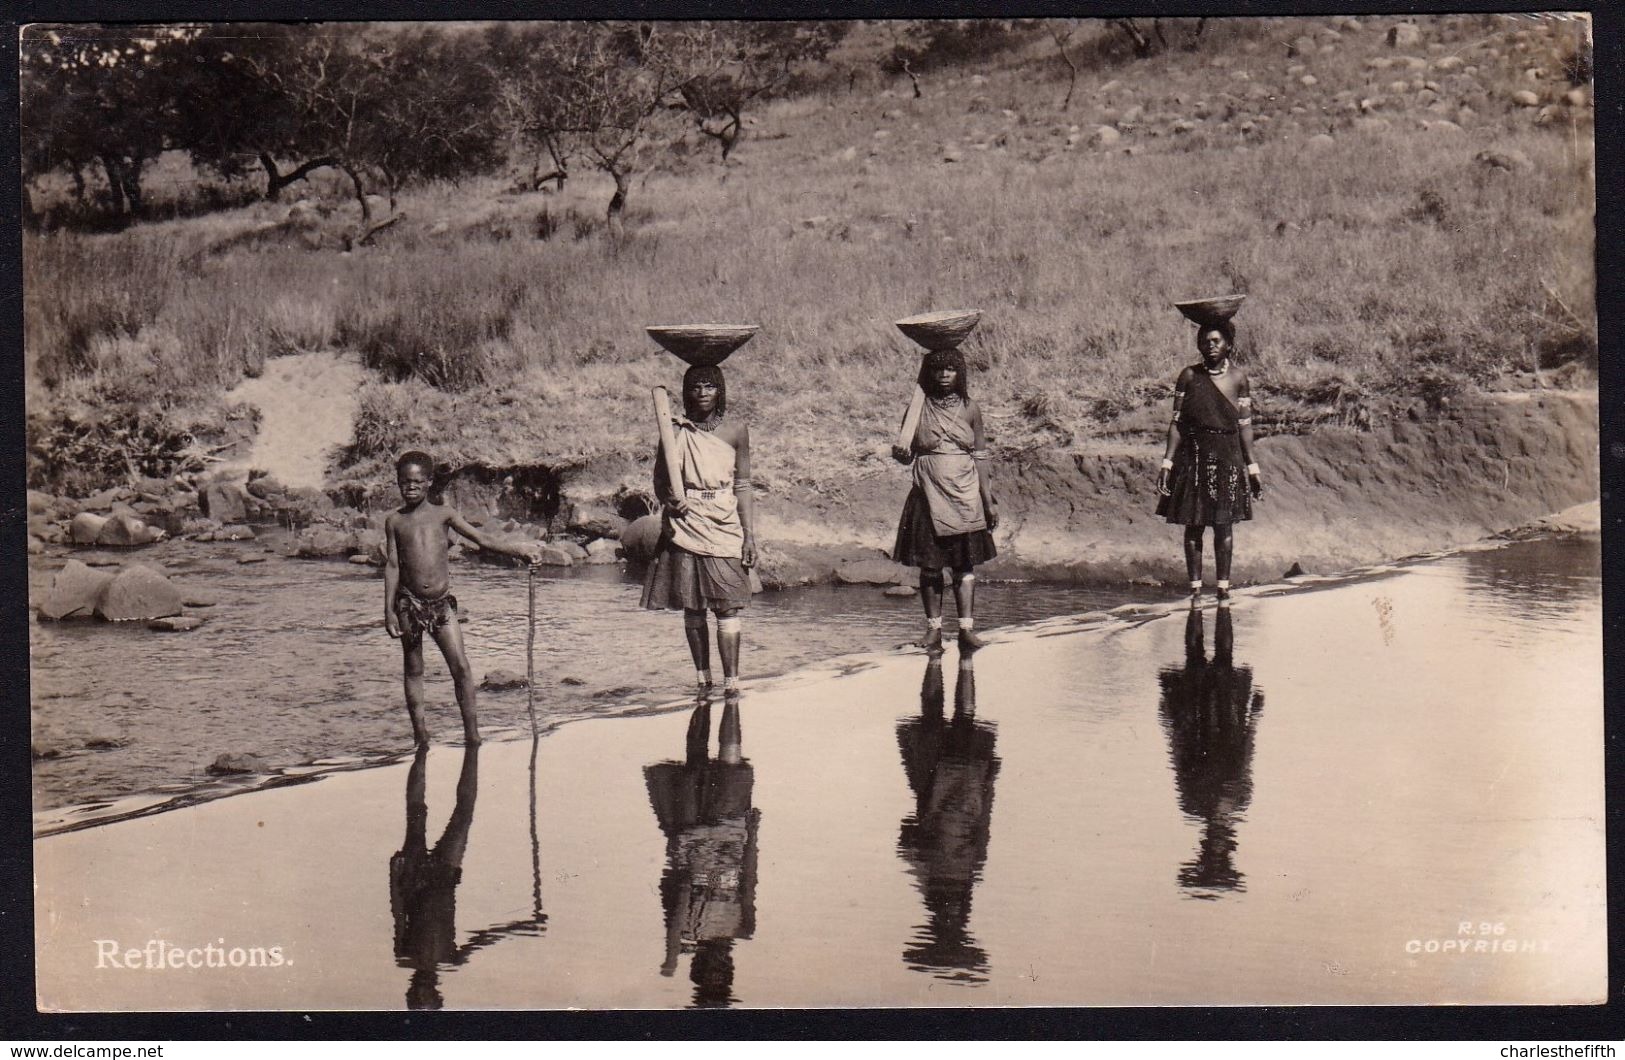 OLD SAPSCO REAL PHOTOCARD SOUTH AFRICA ** REFLECTIONS - NATIVE WOMEN ** AS NEW !! - Südafrika